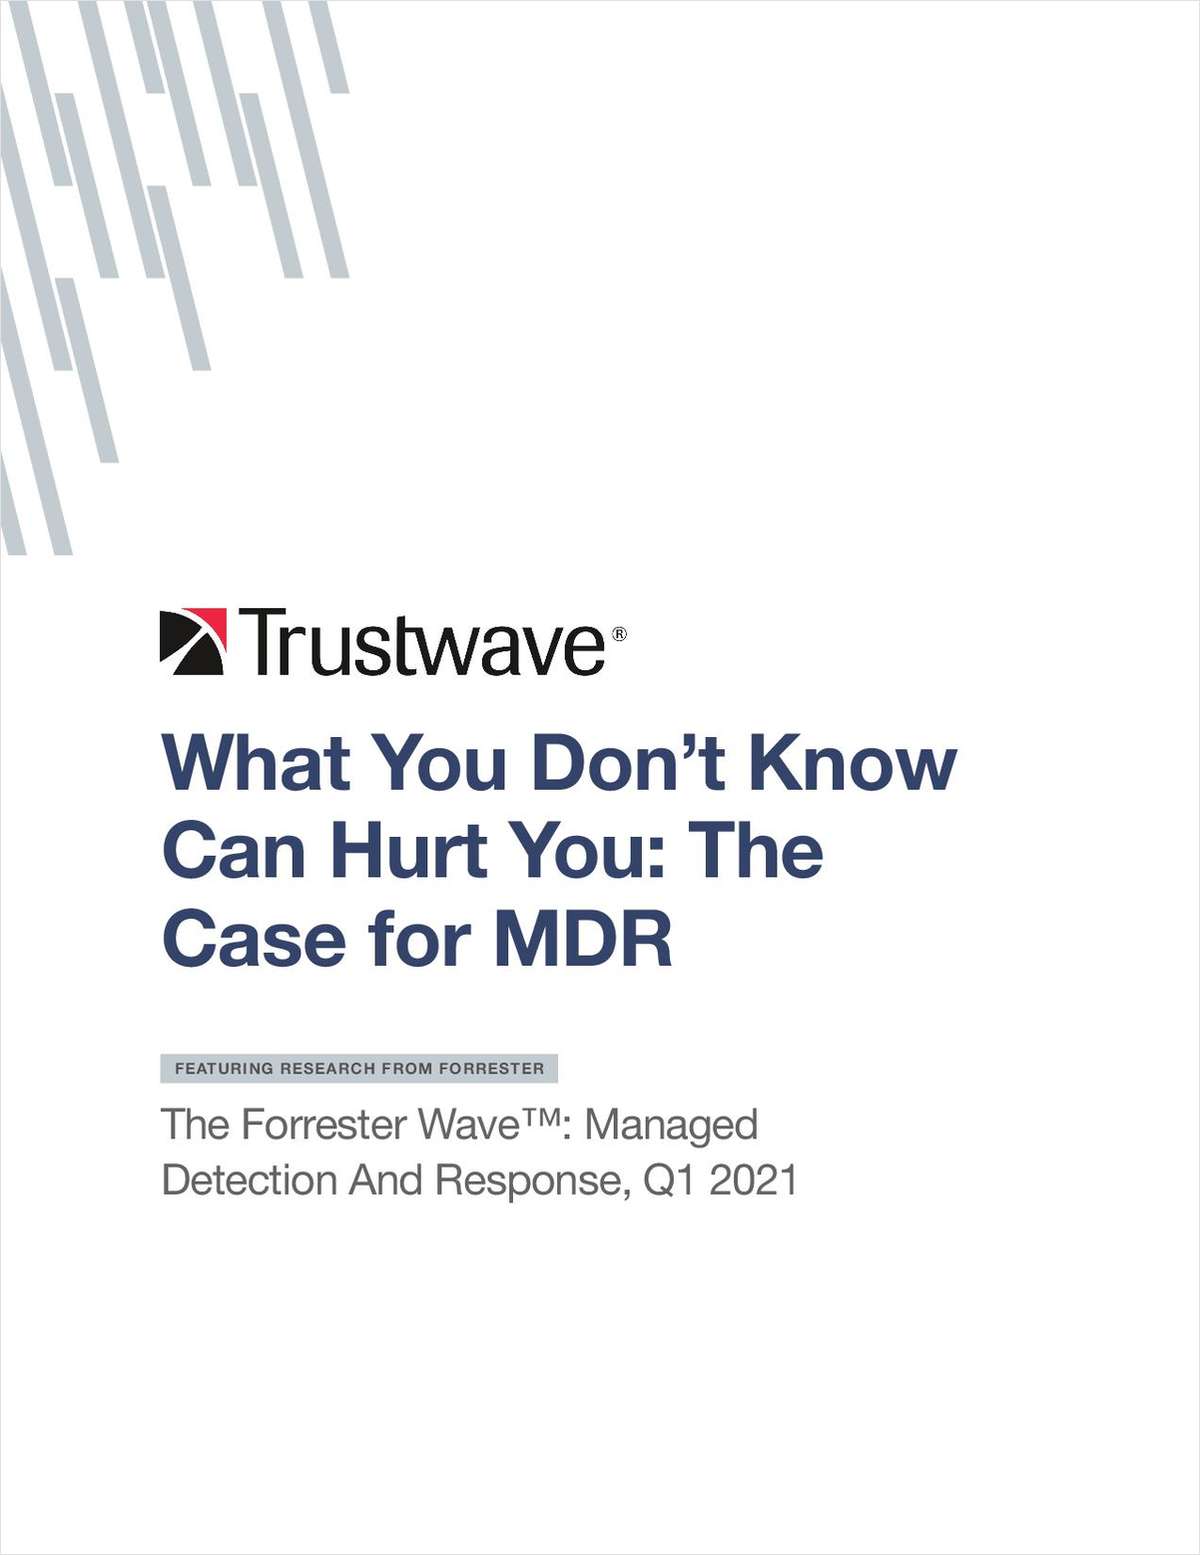 What You Don't Know Can Hurt You: The Case For MDR